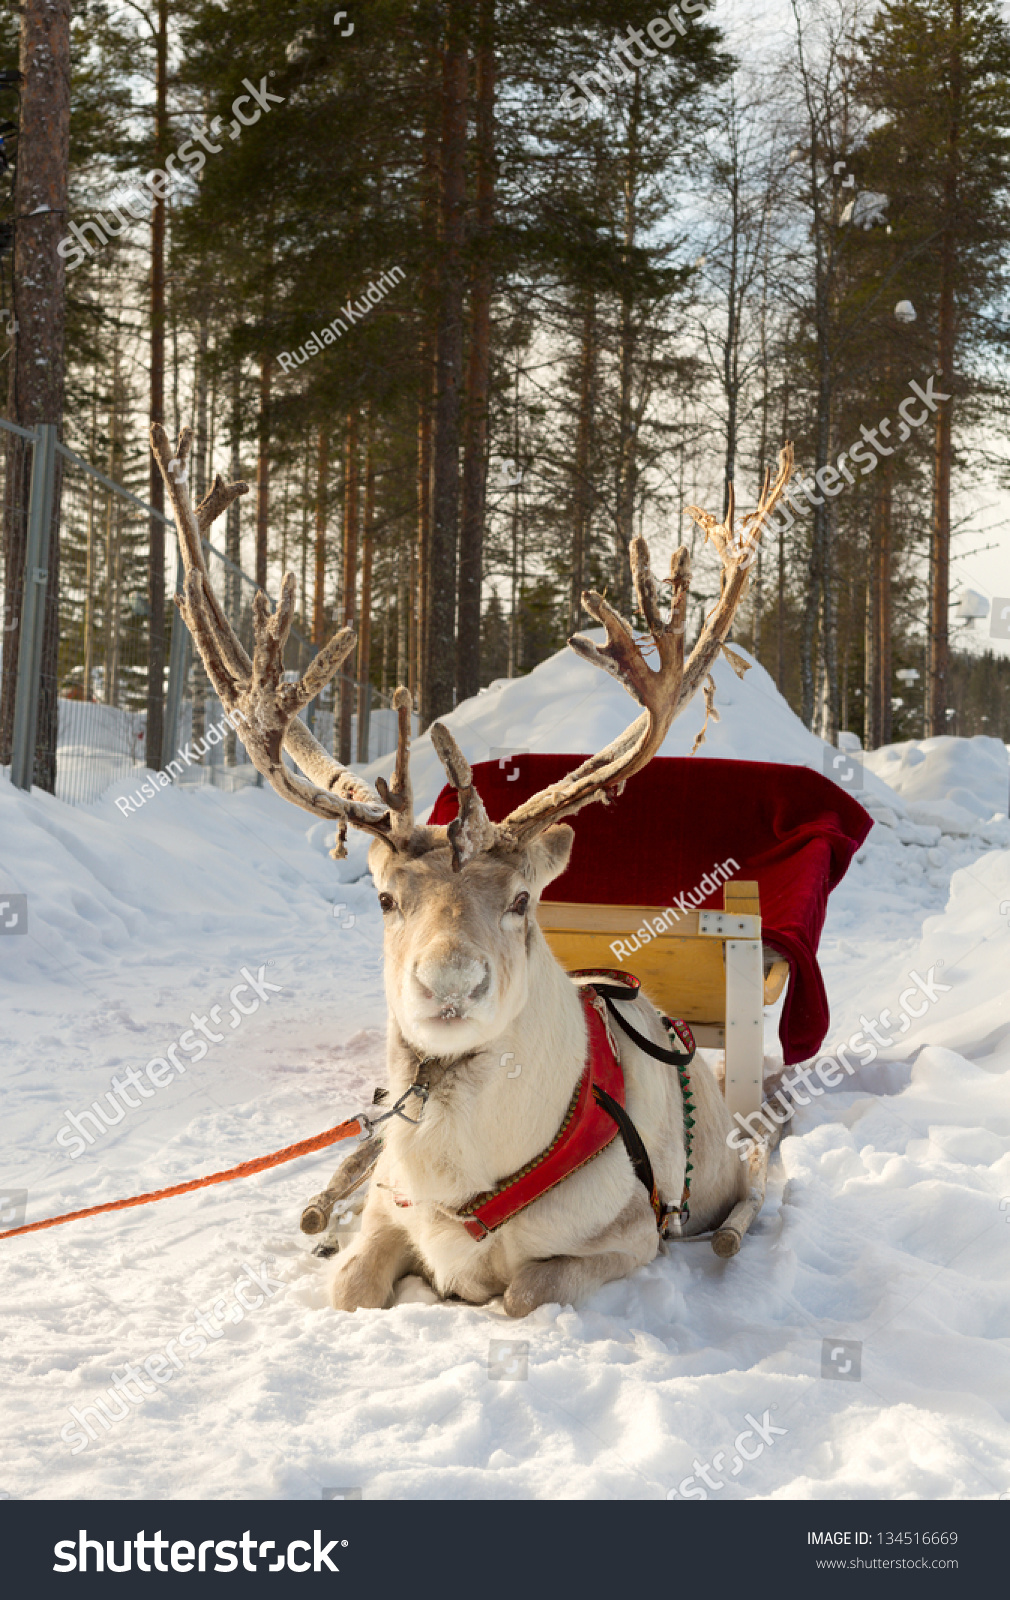 http://image.shutterstock.com/z/stock-photo-reindeer-harnessed-to-a-sled-134516669.jpg